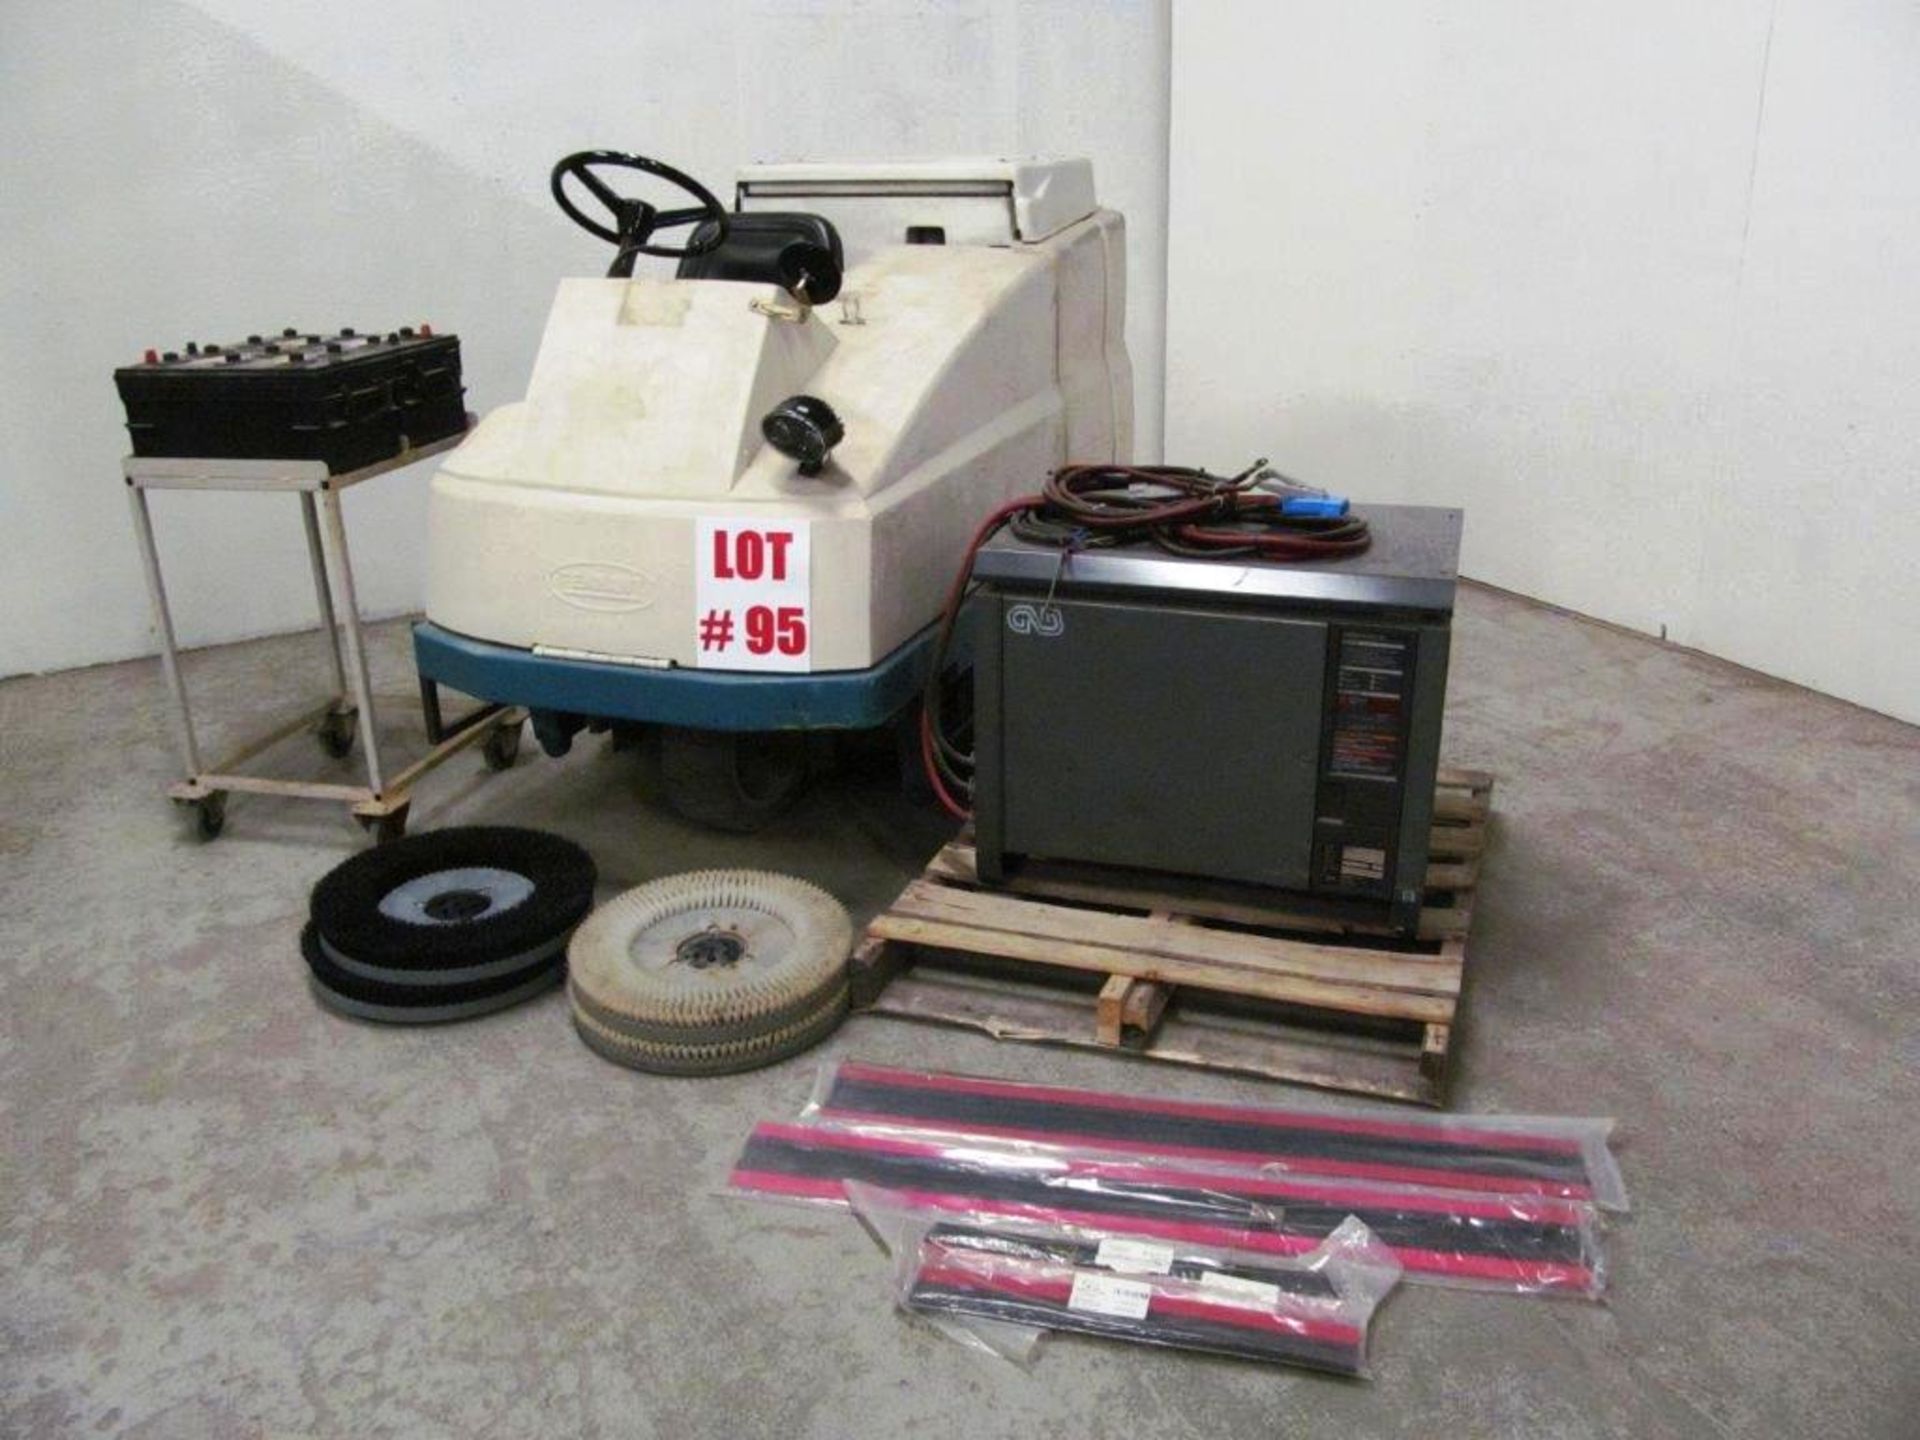 TENNANT FLOOR SWEEPER, ELECTRIC 36V, C/W EXTRA BATTERIES & ACCESSORIES, CONDITION UNKNOWN